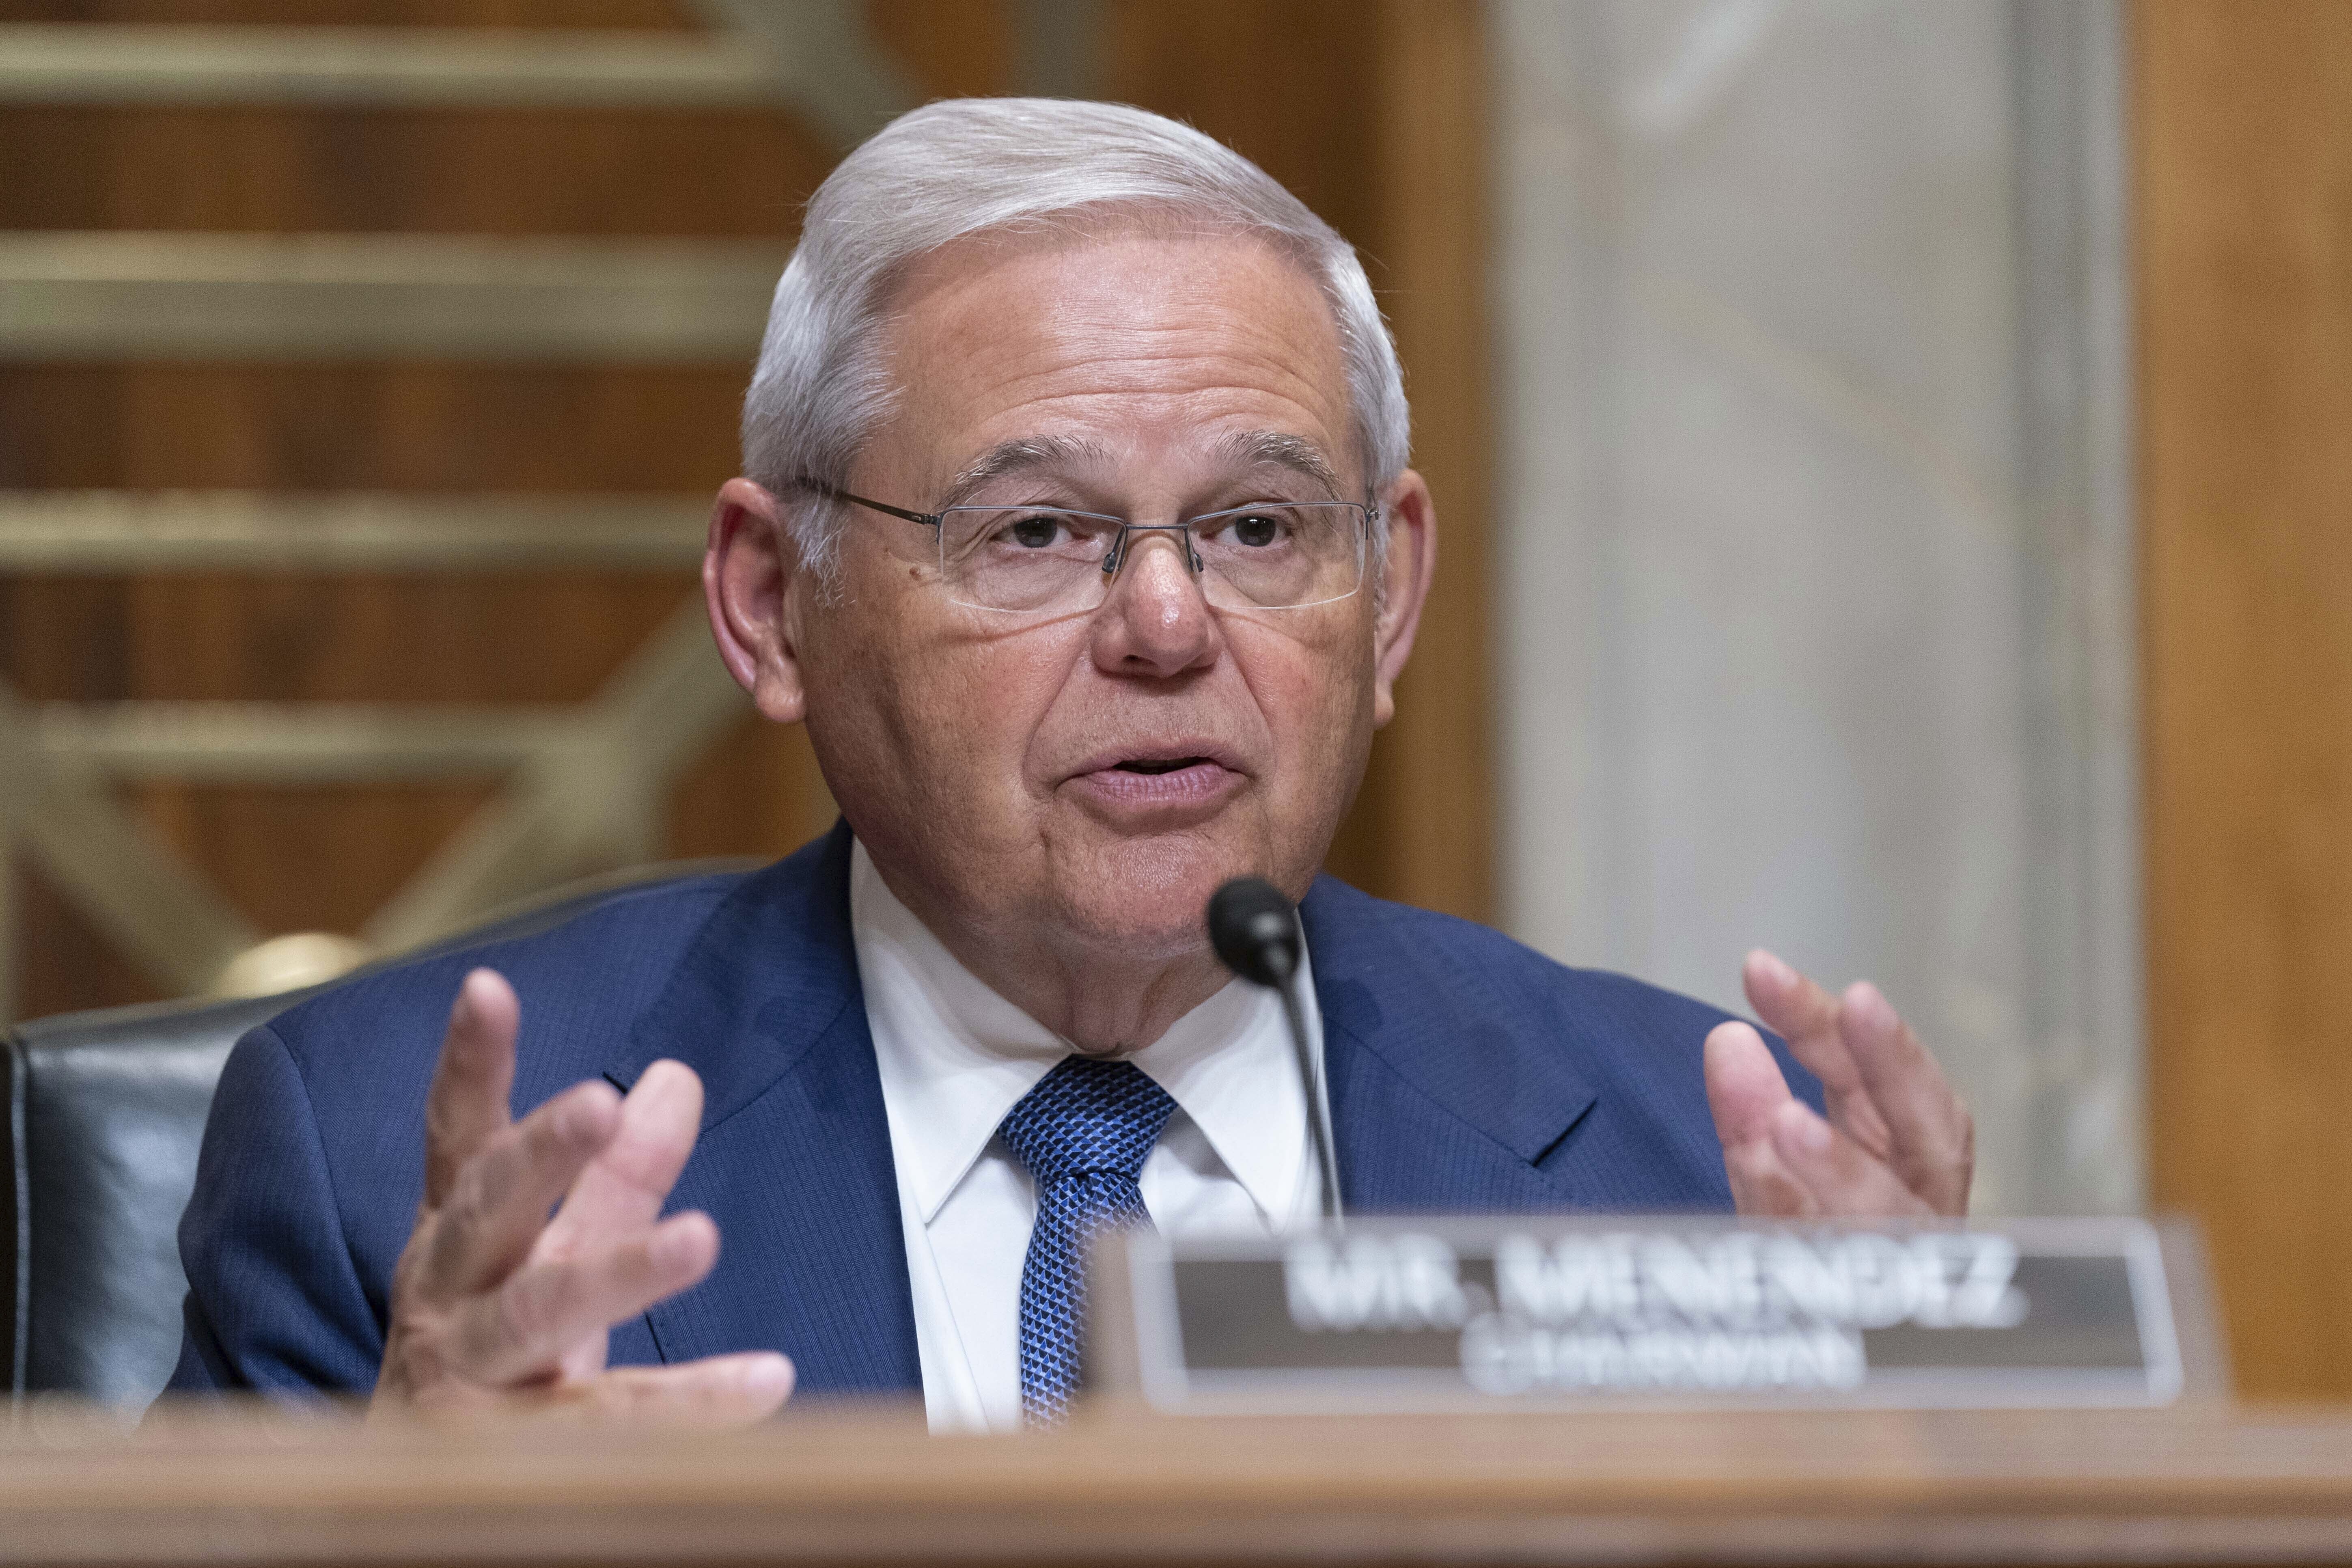 Menendez gains a primary opponent as calls for his resignation grow after indictment